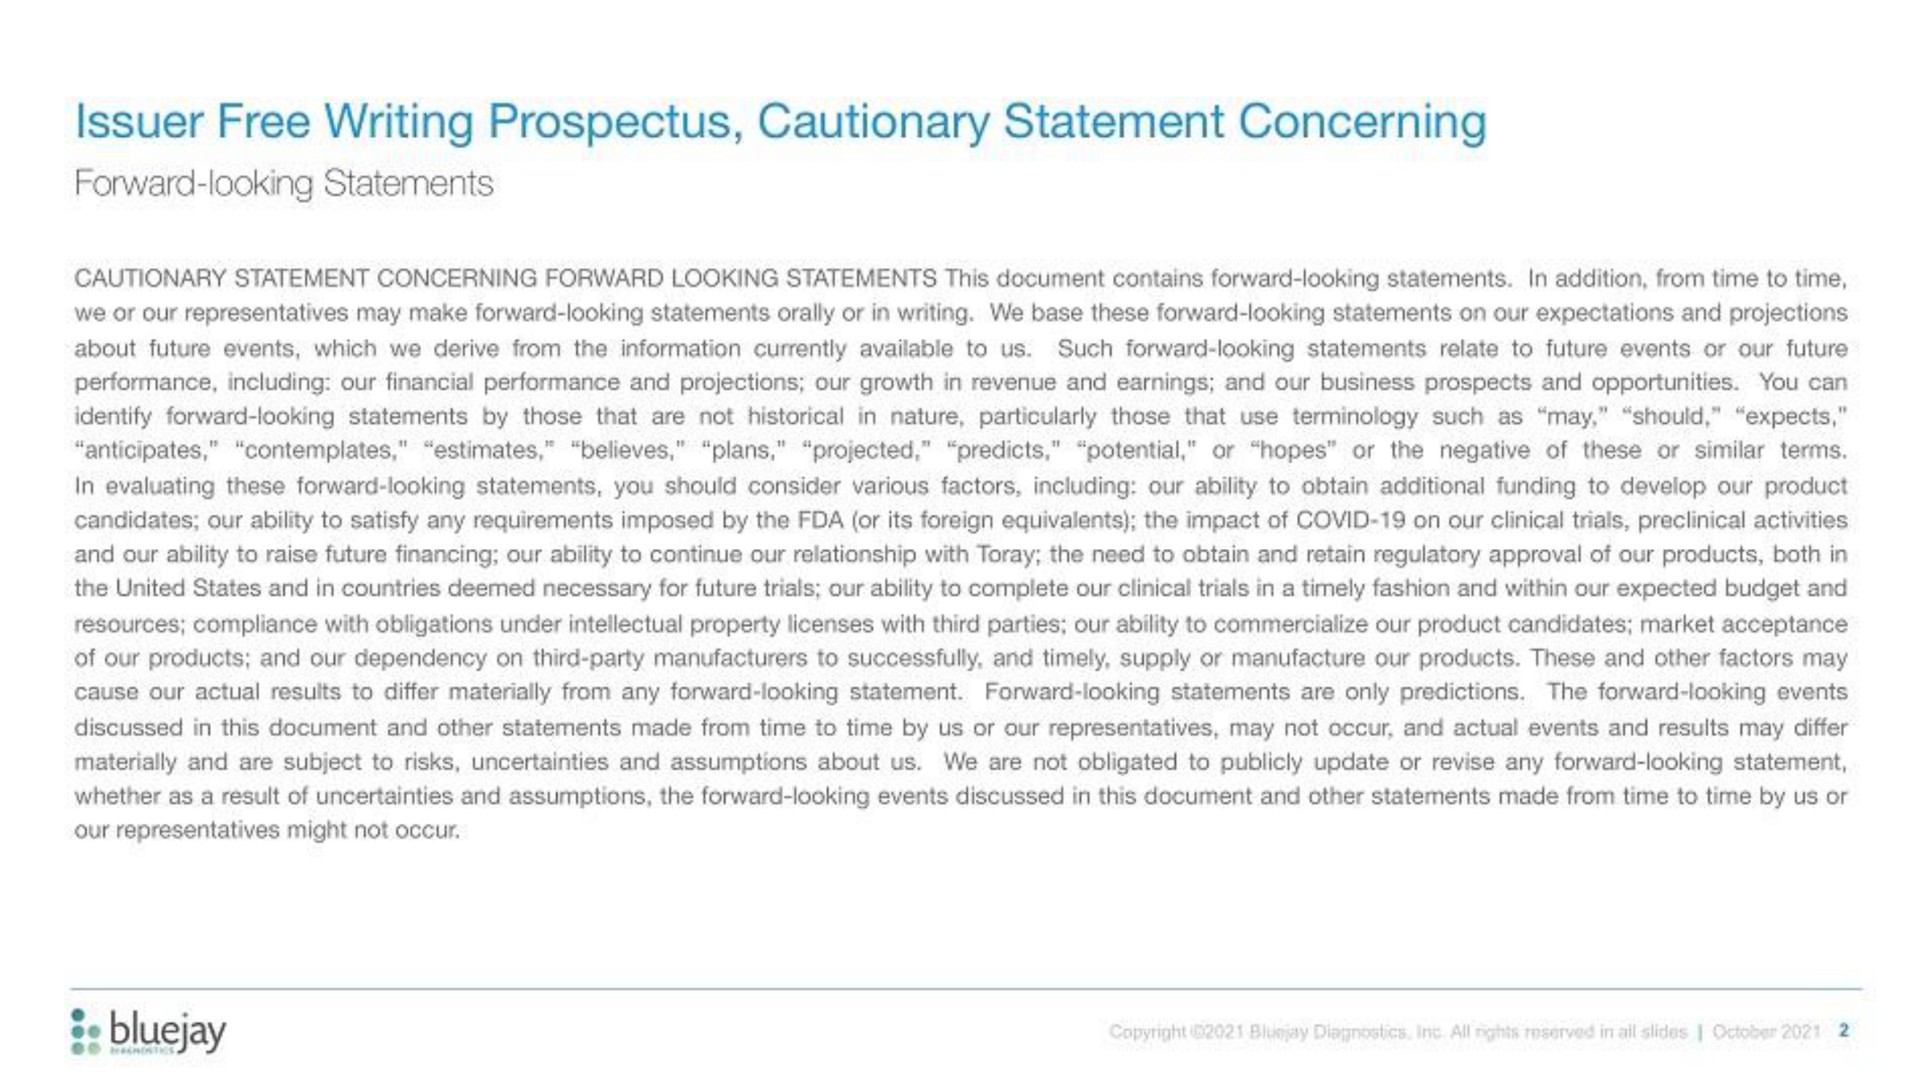 issuer free writing prospectus cautionary statement concerning | Bluejay